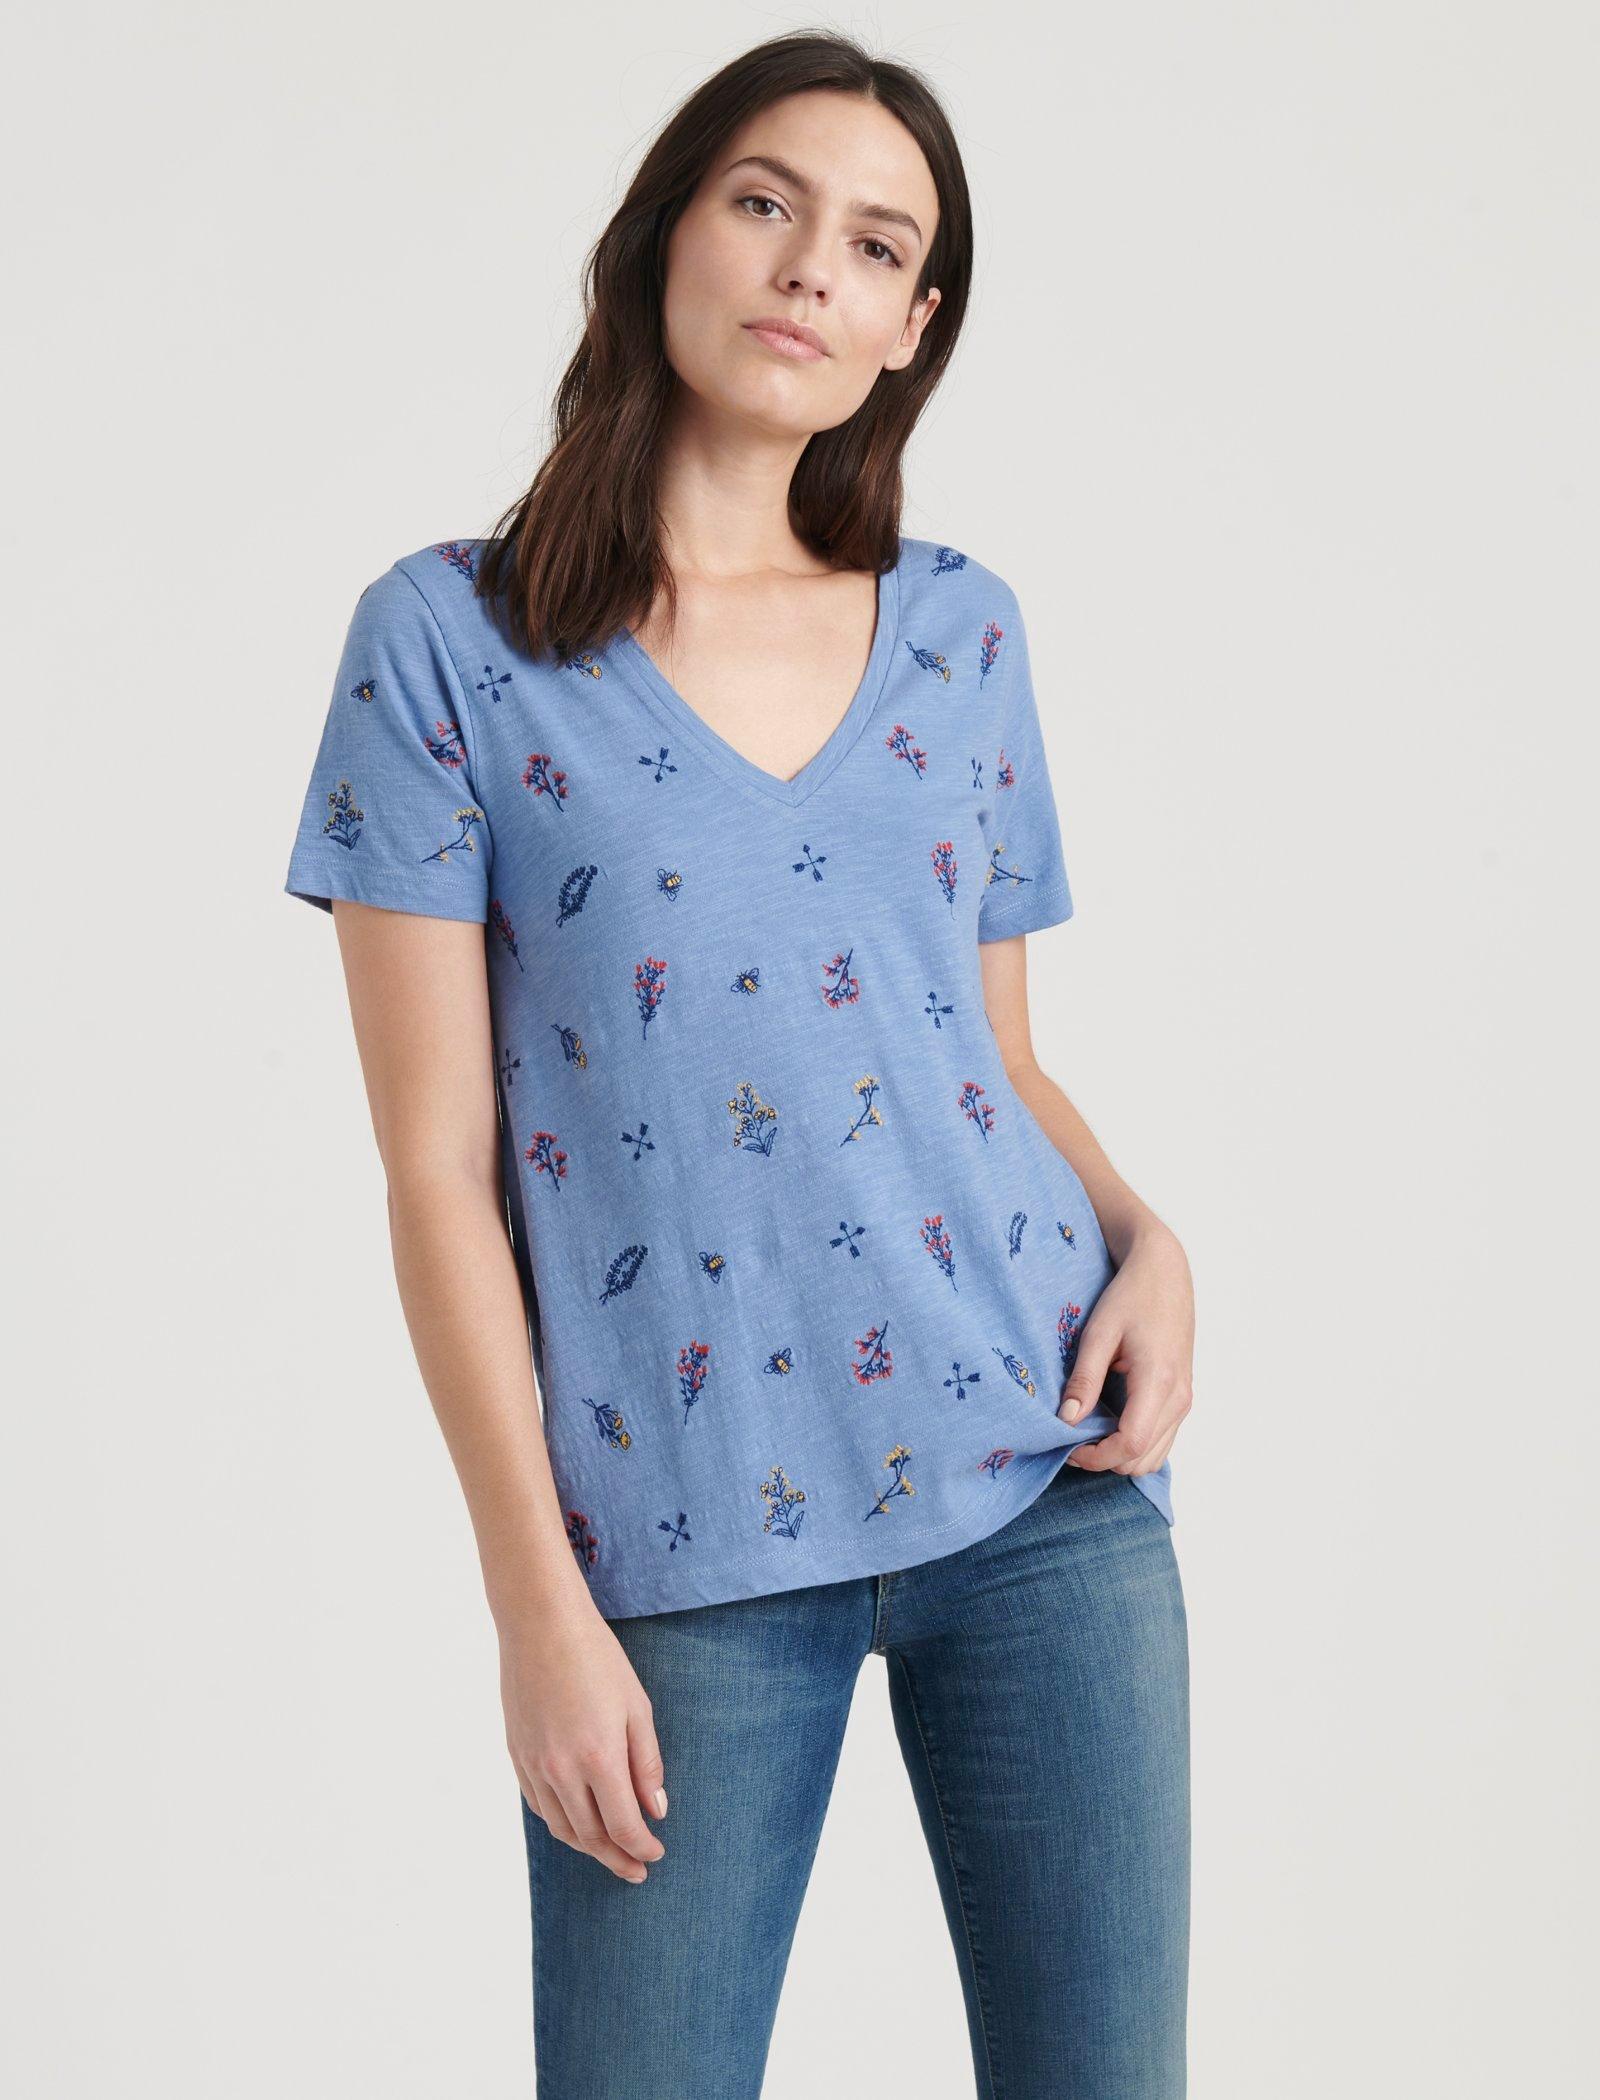 lucky brand floral embroidered tee